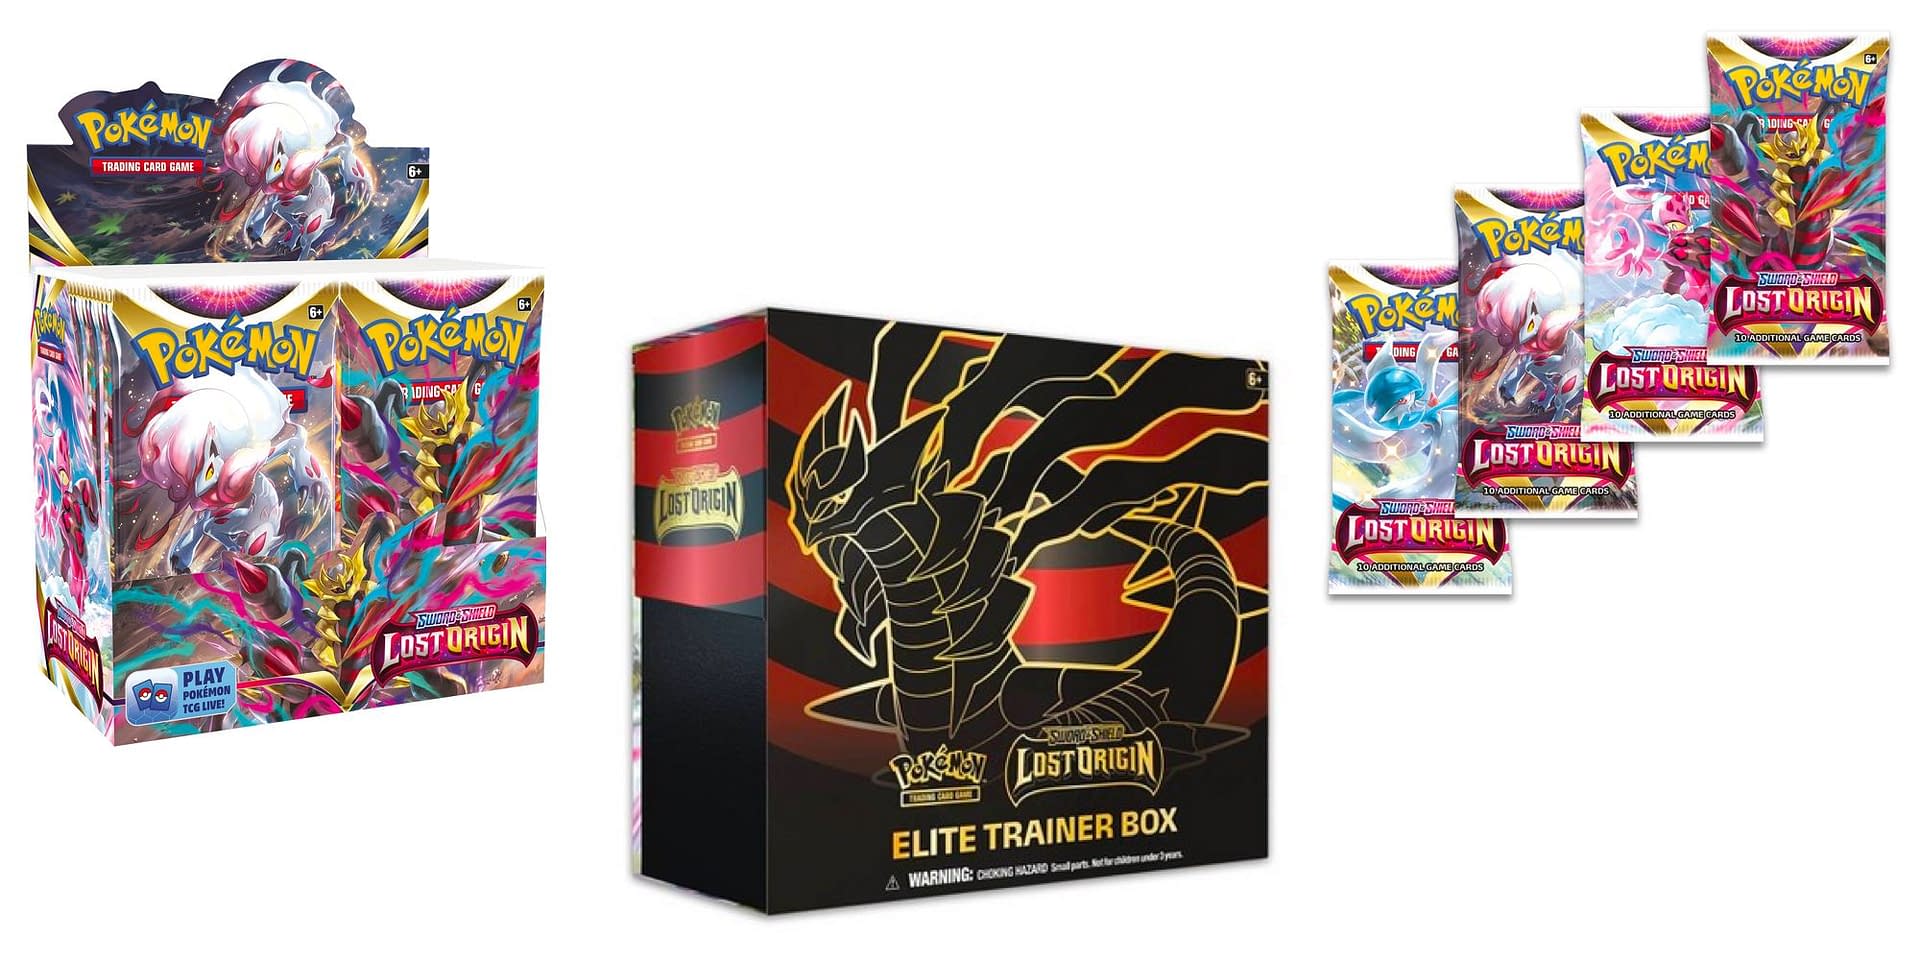 Best Pokemon TCG Sets To Buy To Get Started